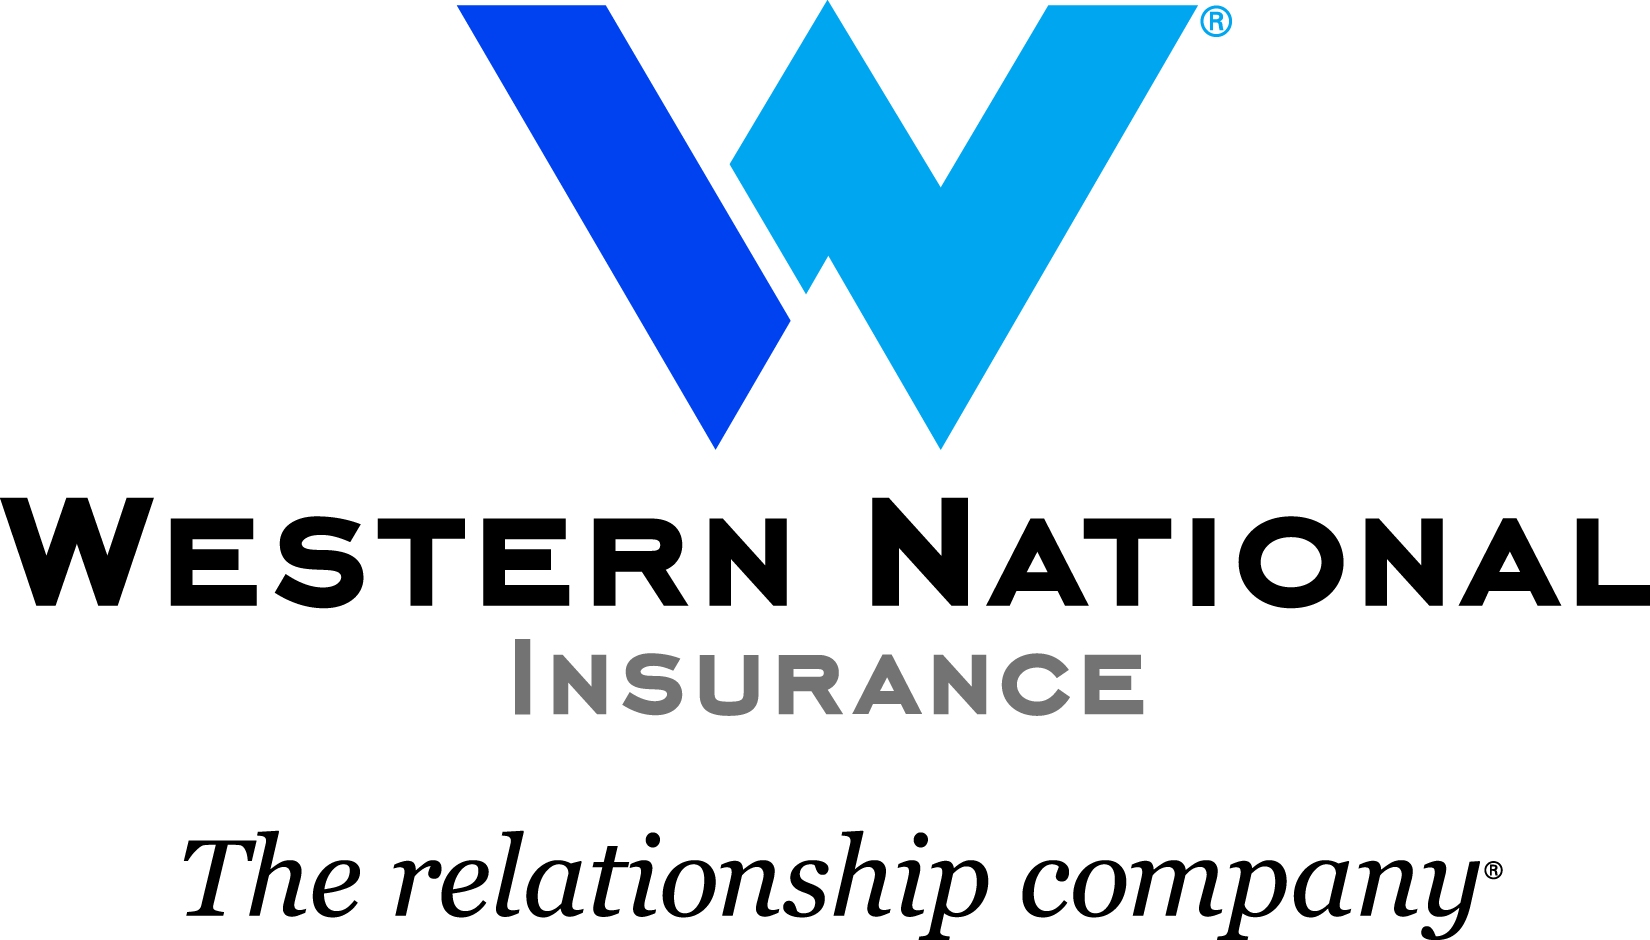 Western National Insurance Group